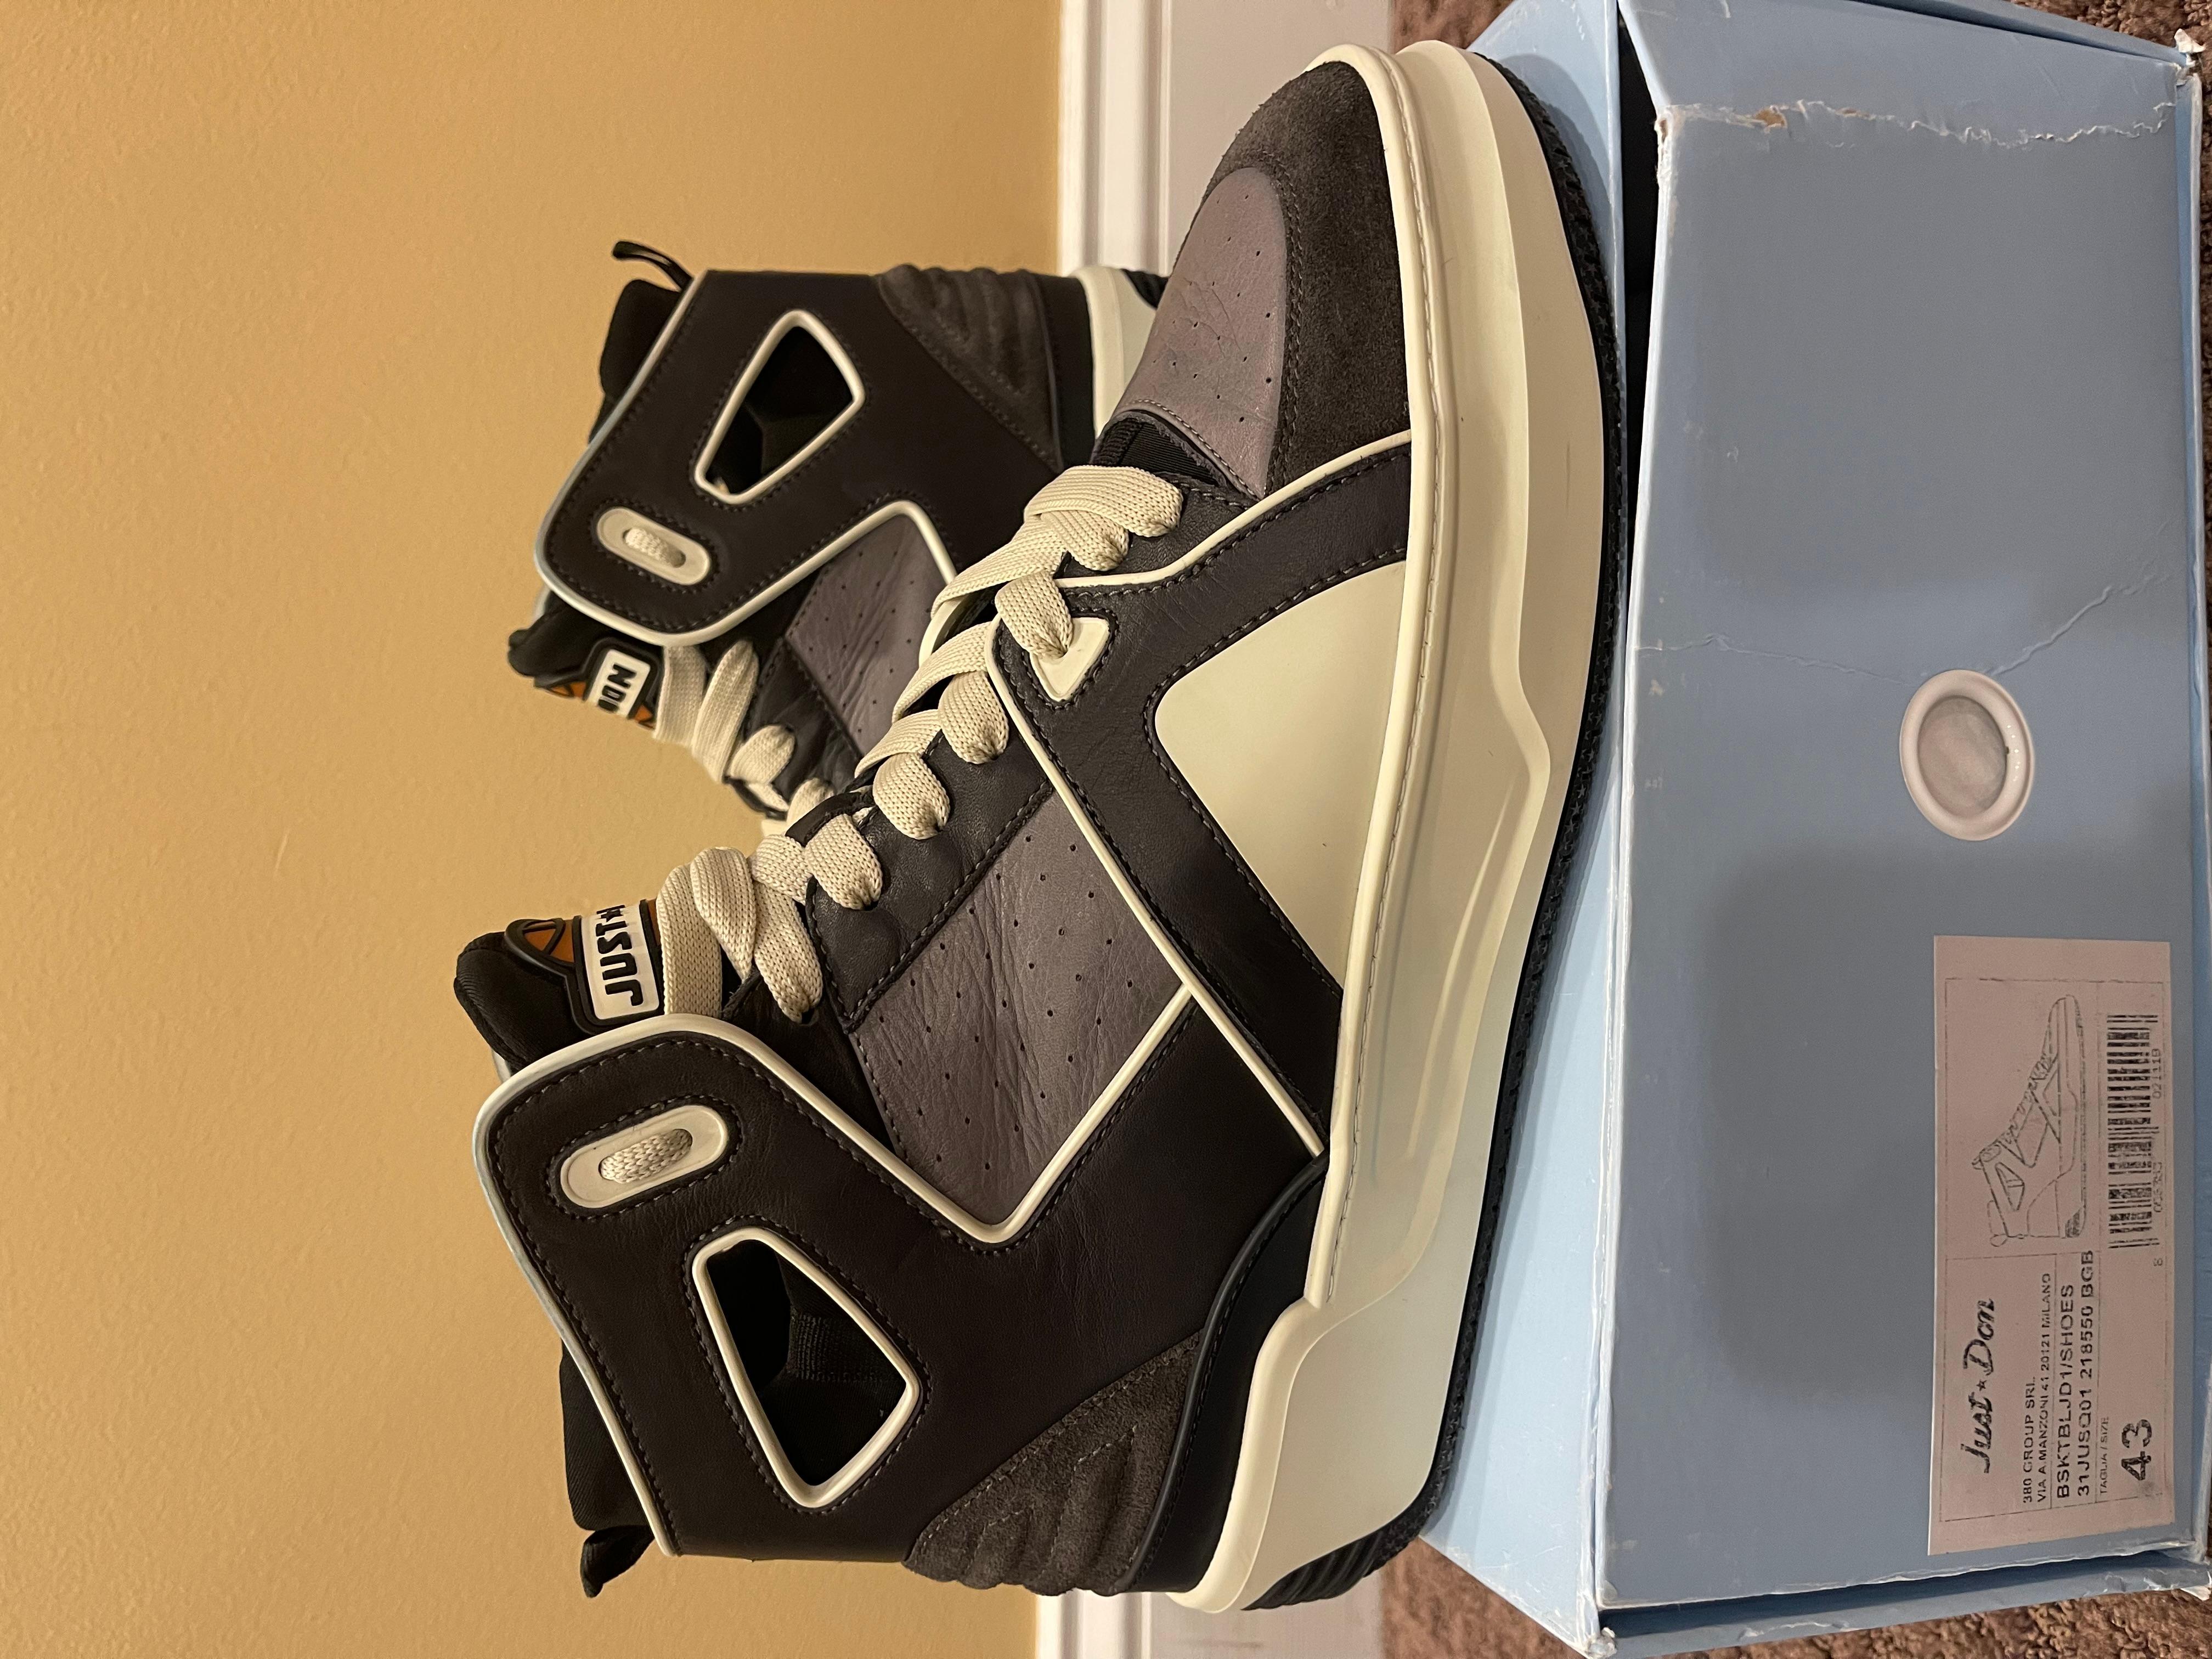 Just Don Luxury Basketball Courtside Hi
Size 43 (fits US10-11)
Og all (box is slightly damaged)

Good overall condition but signs of wear (view all detailed pics)
Retailed at $660
Made in Italy, a very high quality luxury shoe

All sales are final.